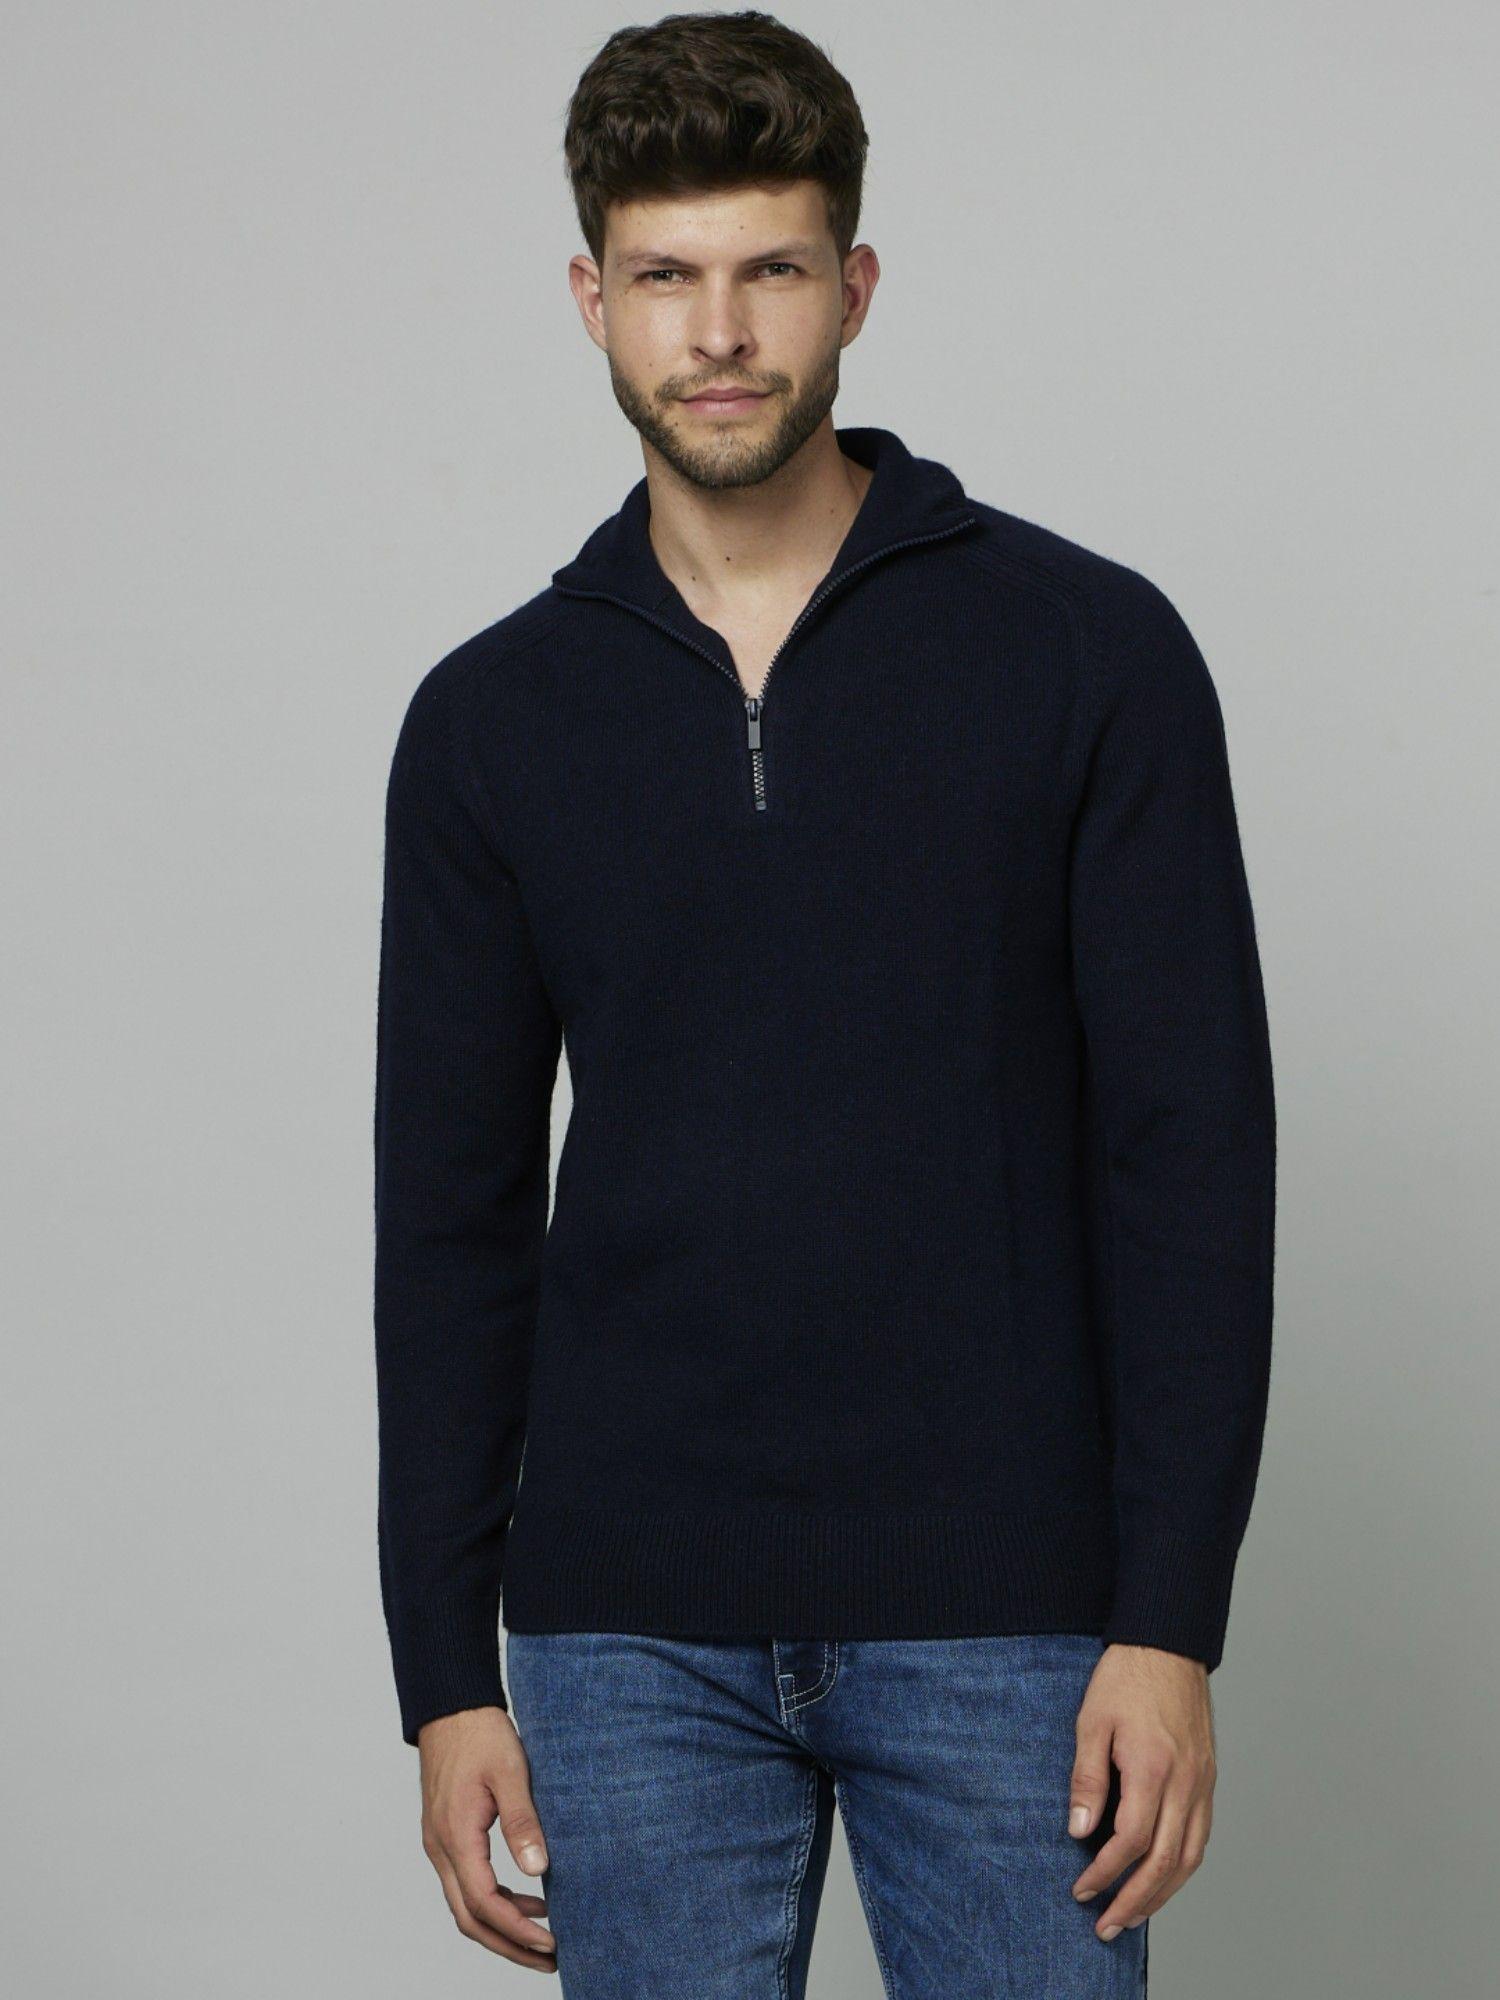 Basic Solid Navy Blue Long Sleeves Sweater